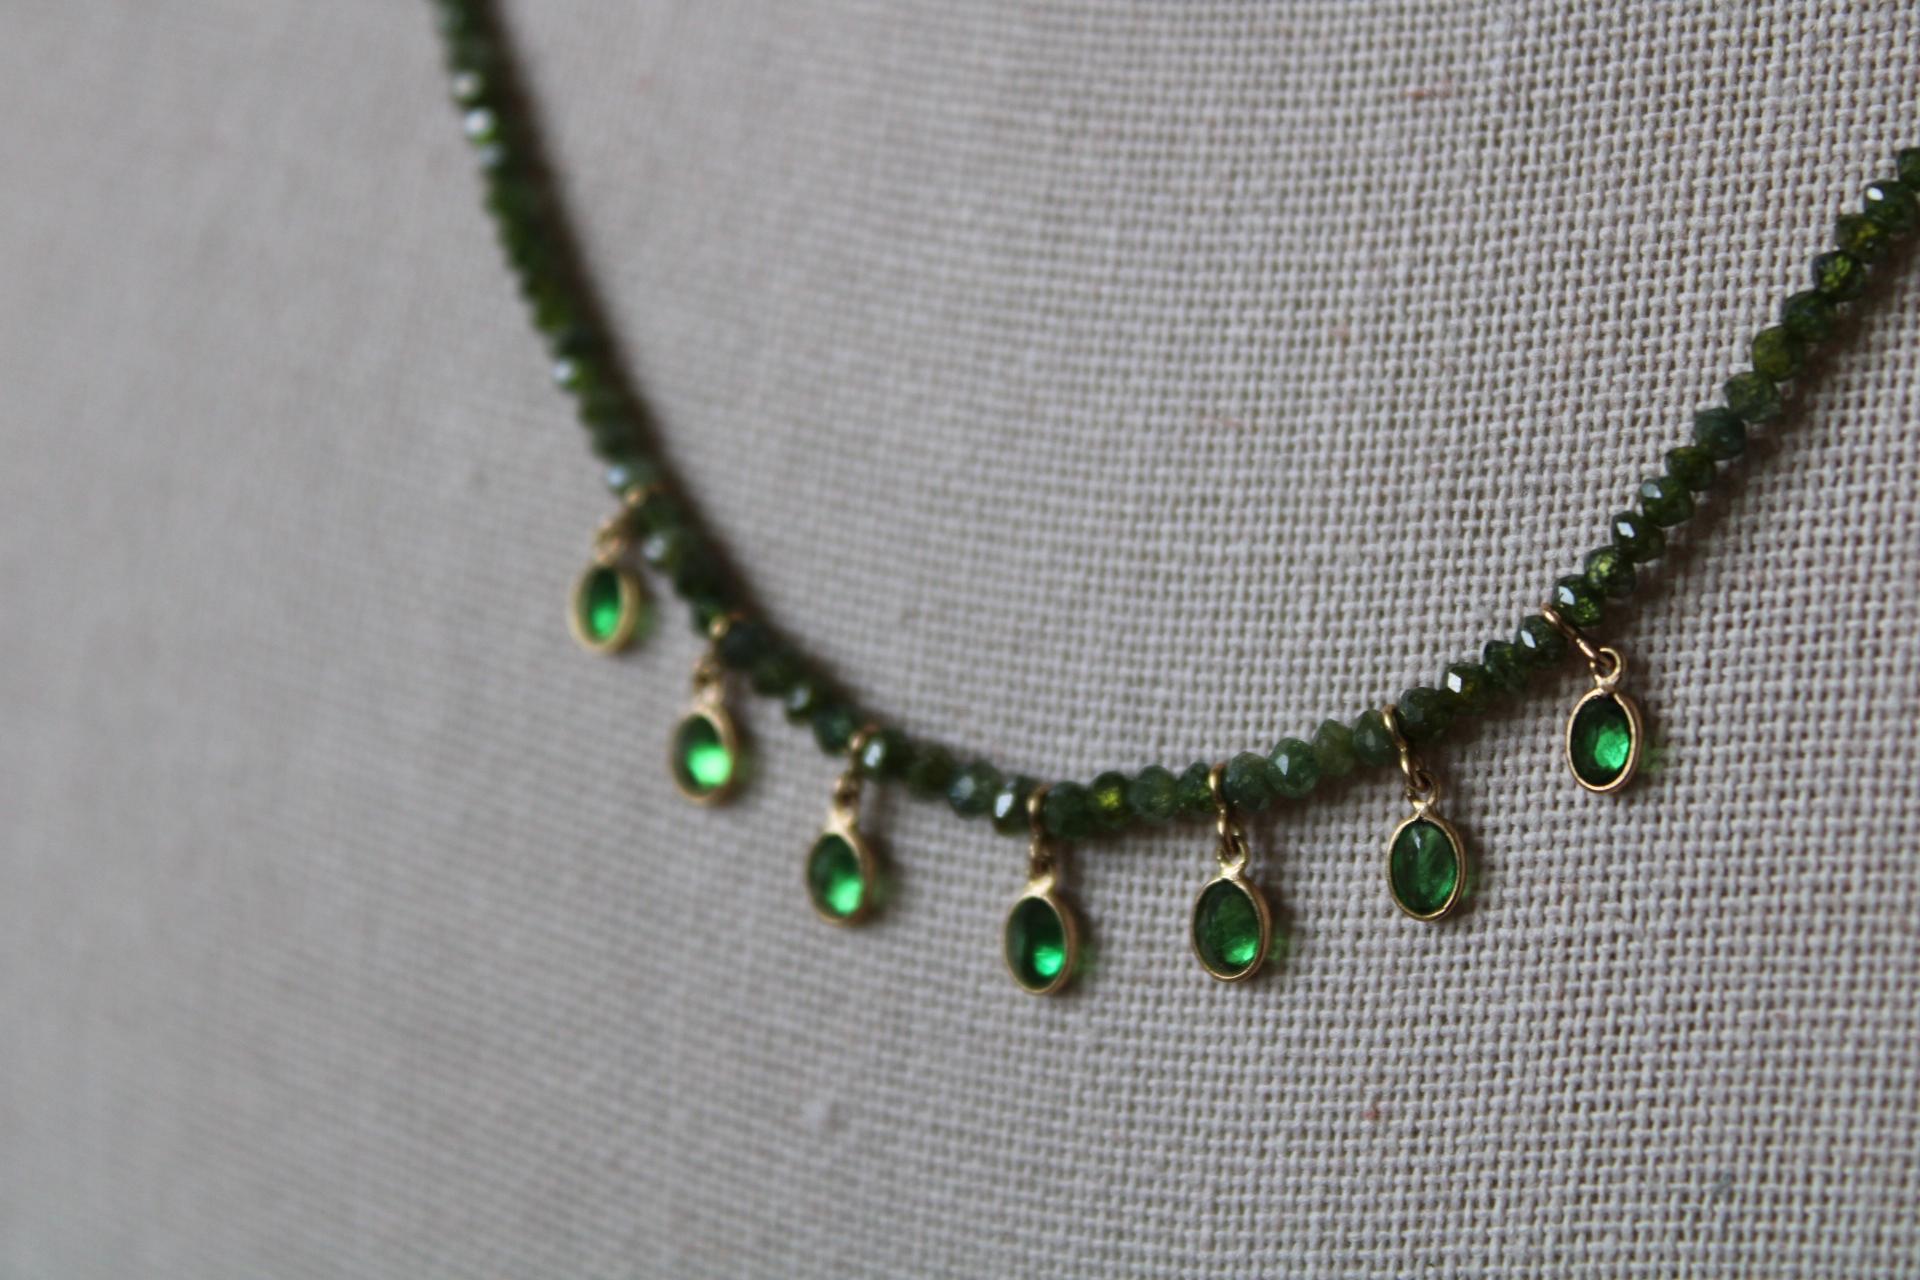 17.22 Carat Diamond Bead Chain in 18K Gold with Tsavorite Pears For Sale 3